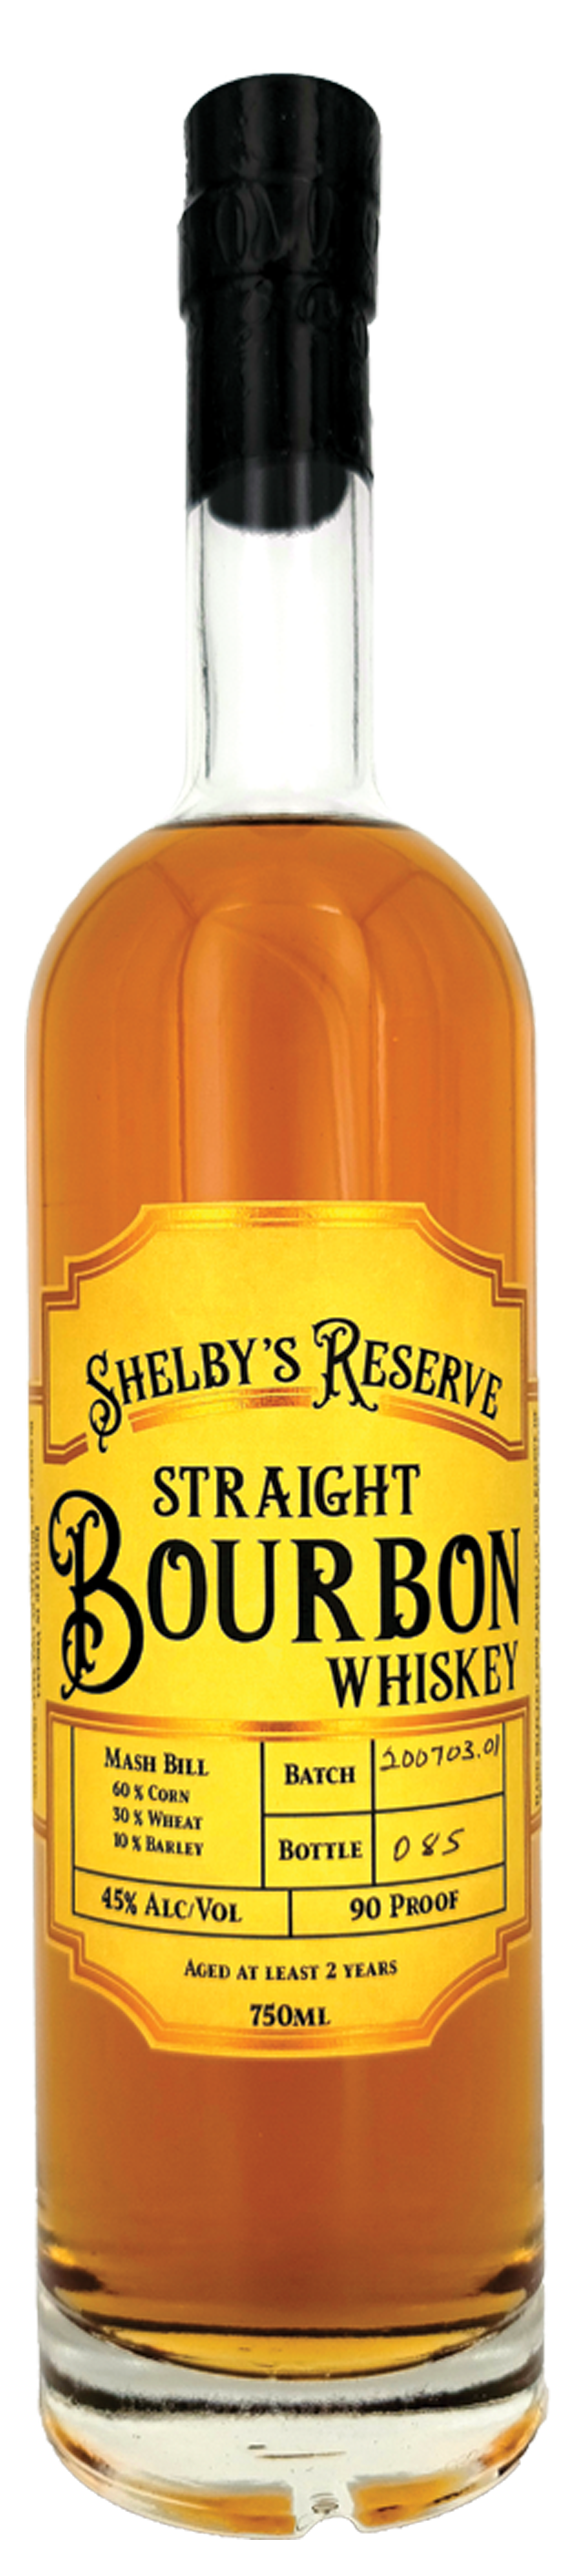 Lost State - Shelby's Reserve Straight Bourbon Whiskey